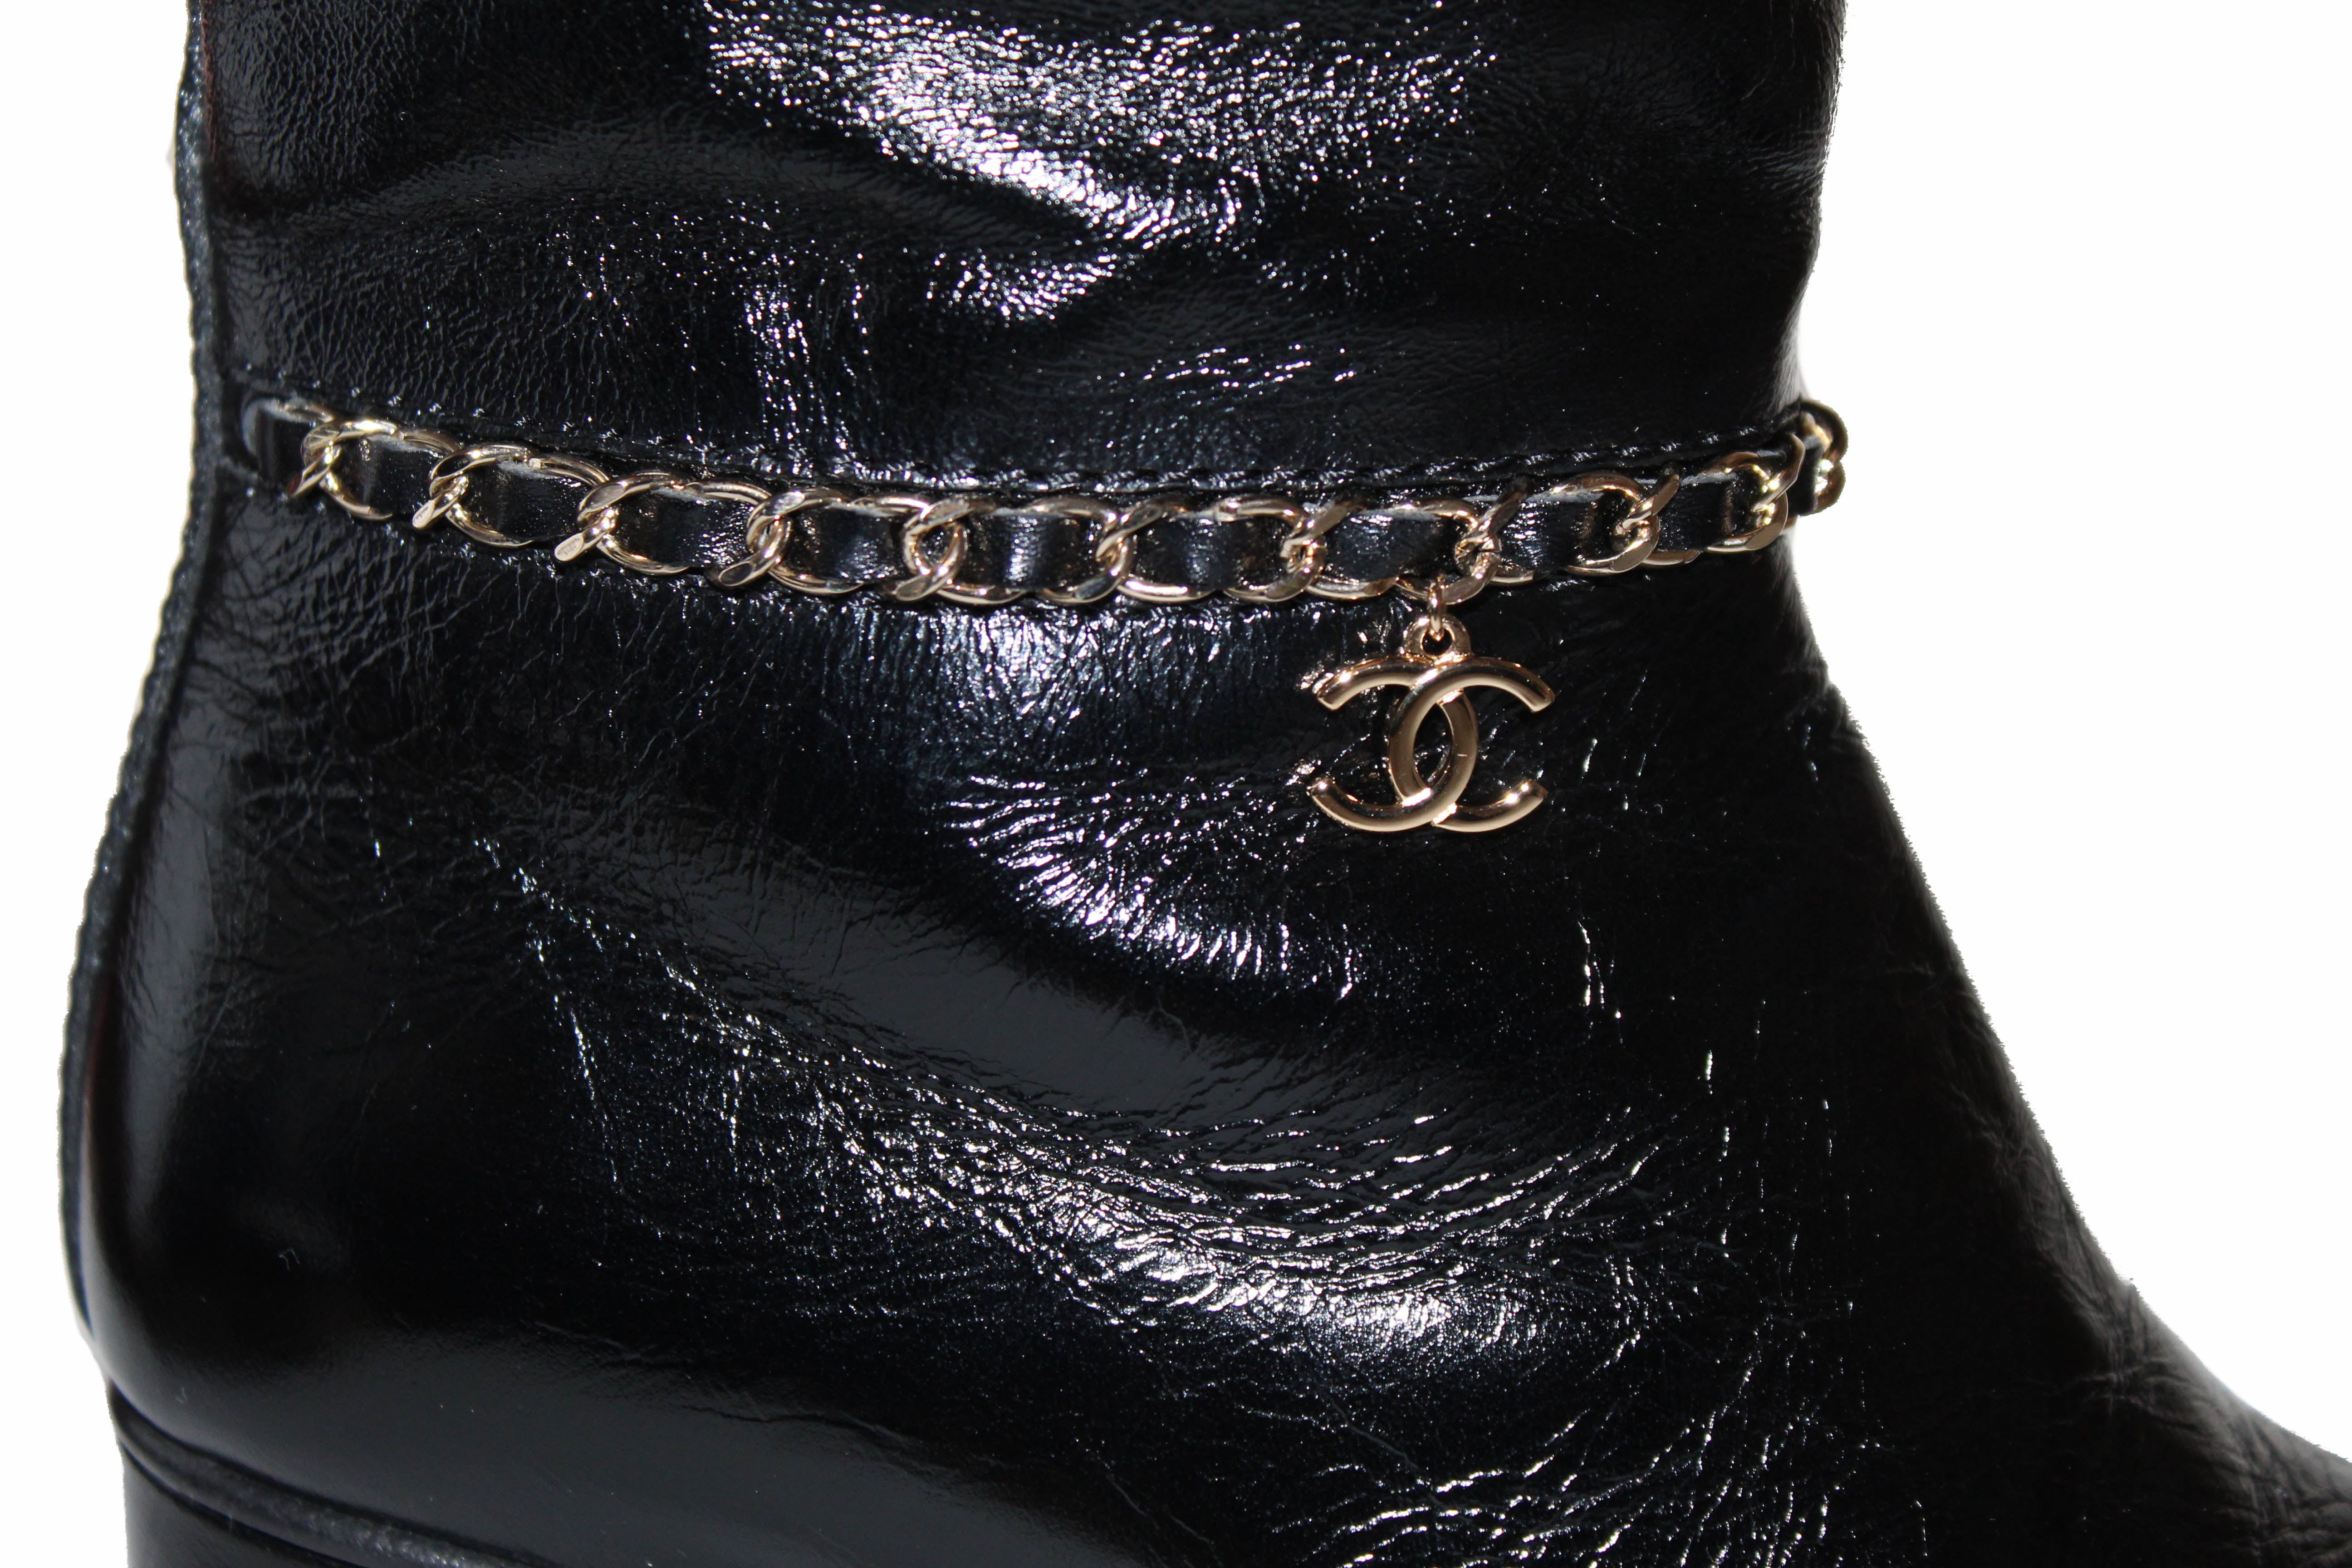 Chanel Patent Leather Heel Chain Boots in Black Size 38C